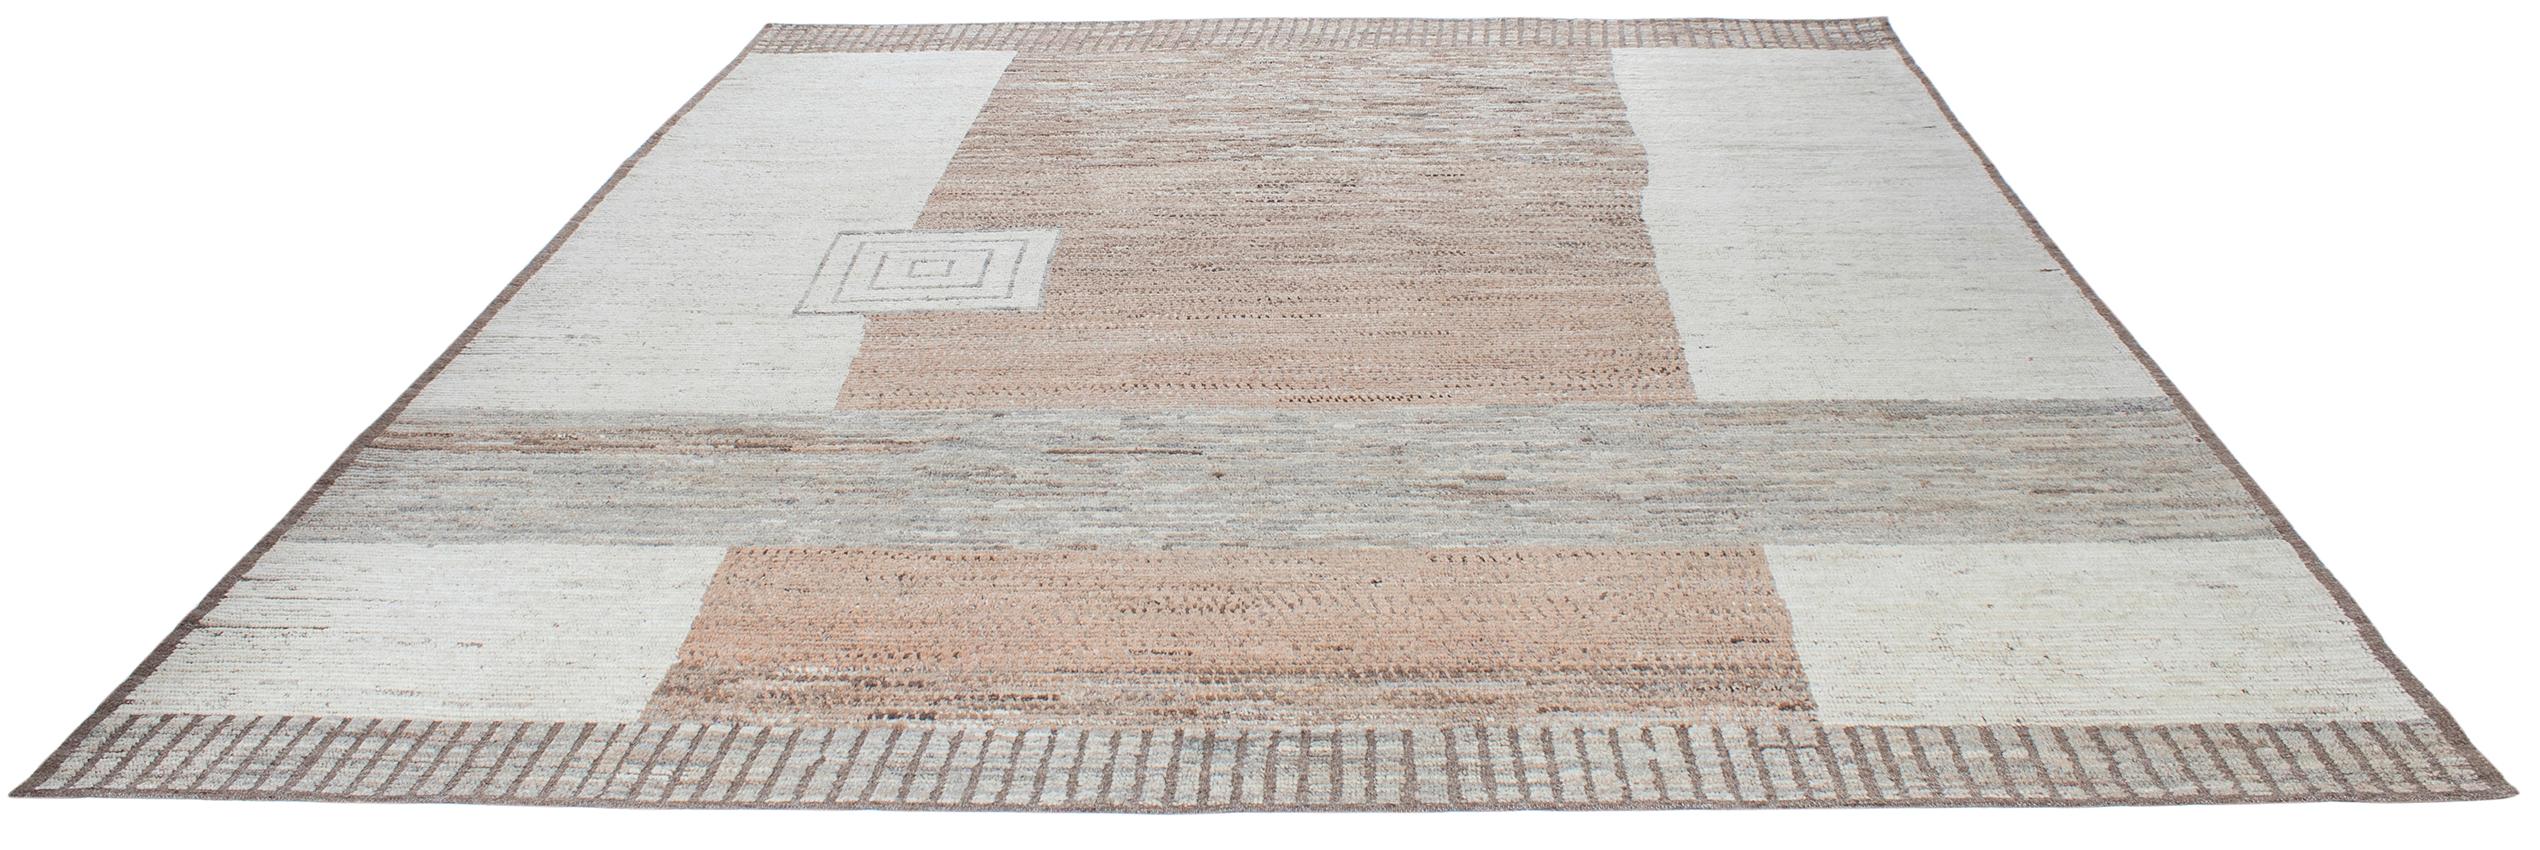 Mid-Century Modern Modern Minimalist Mid-Century Style Wool Rug in Beige, Copper, and Grey Tones For Sale